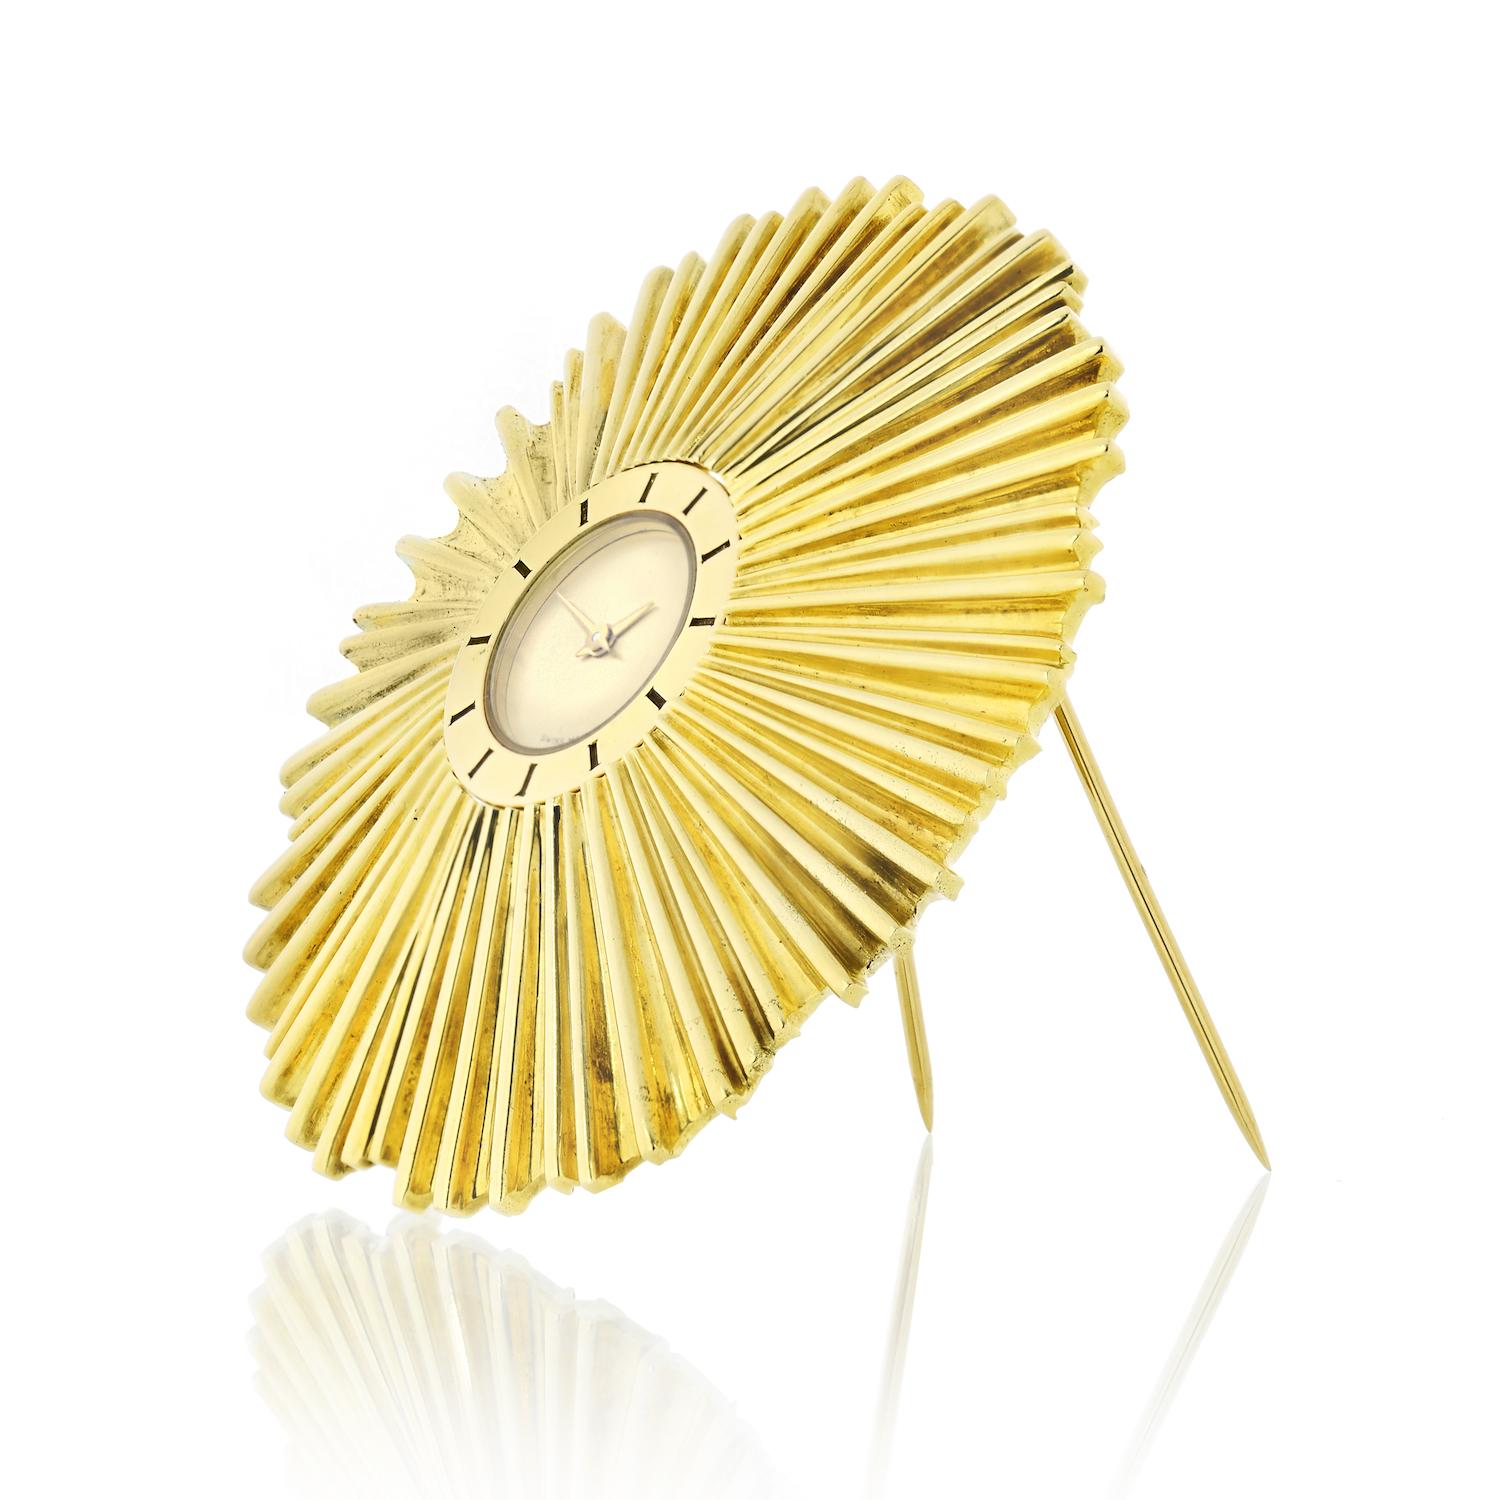 Verdura 18K Yellow Gold Watch Brooch.
Quartz movement, round dial with the round case in radiating sculpted gold surround. 

METAL: 18k yellow gold
SIGNATURE: VERDURA
MARKS: 18K
SIZE/DIMENSIONS: 5.9 cm diameter
GROSS WEIGHT: 63.3 grams